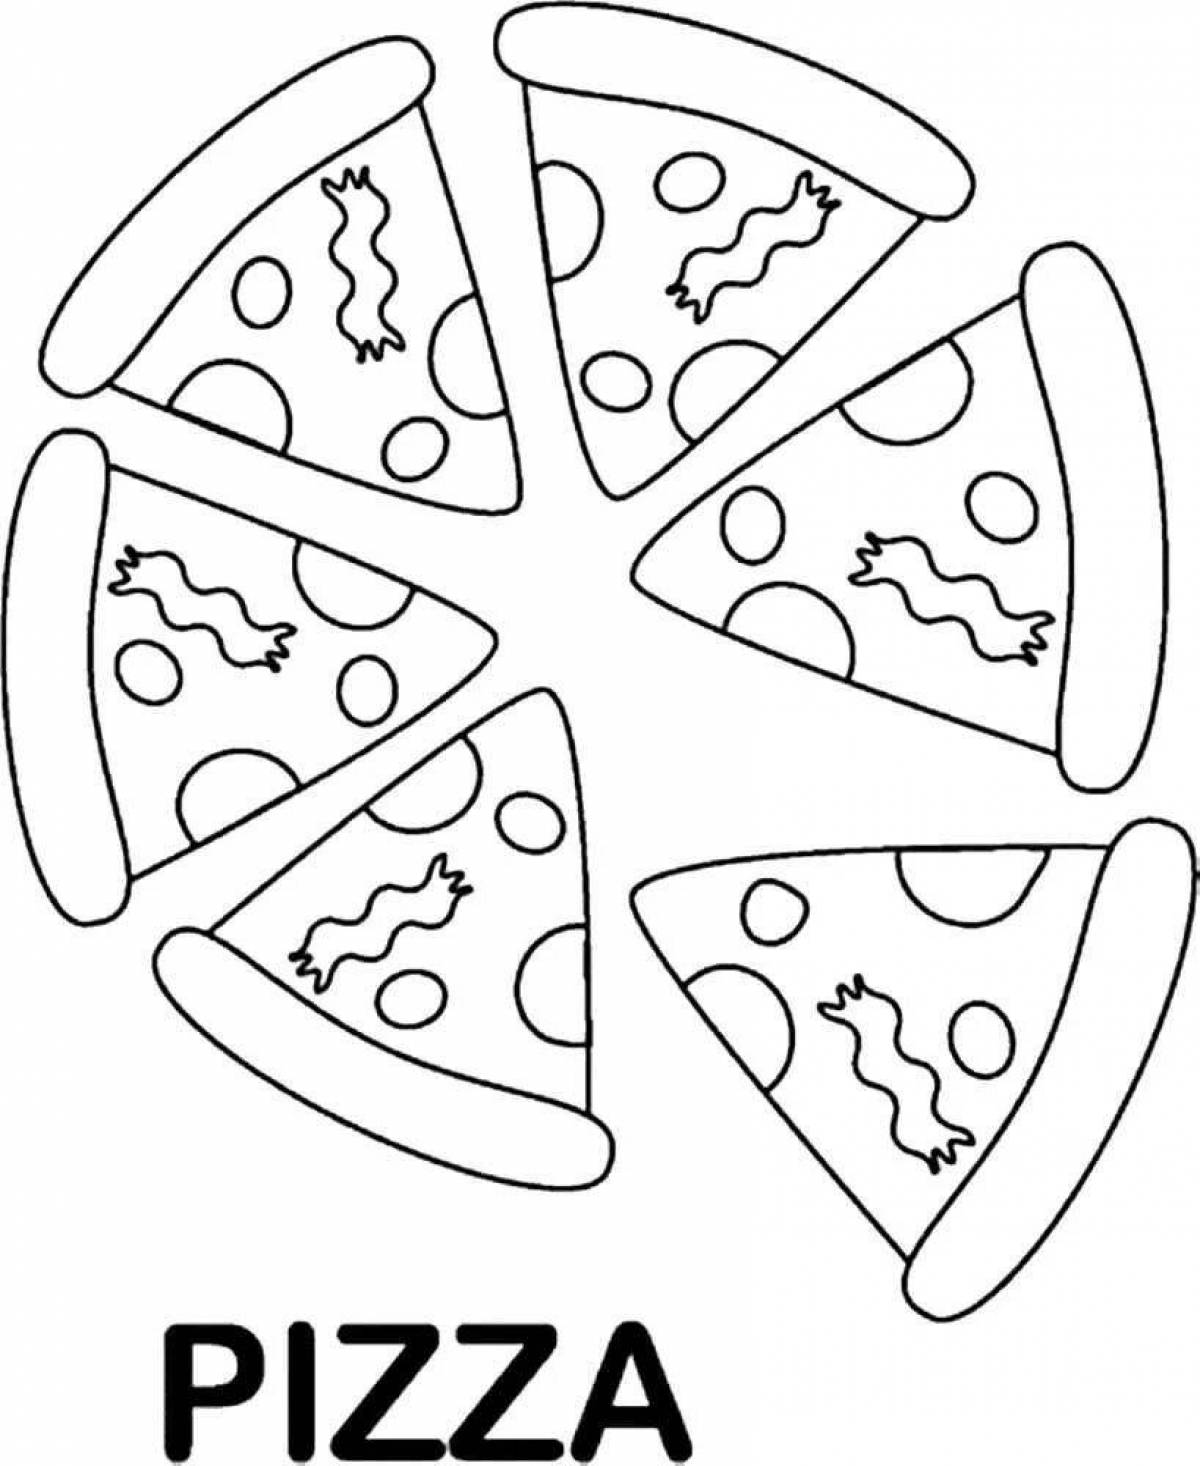 Pizza with spicy sauce and cheese coloring page